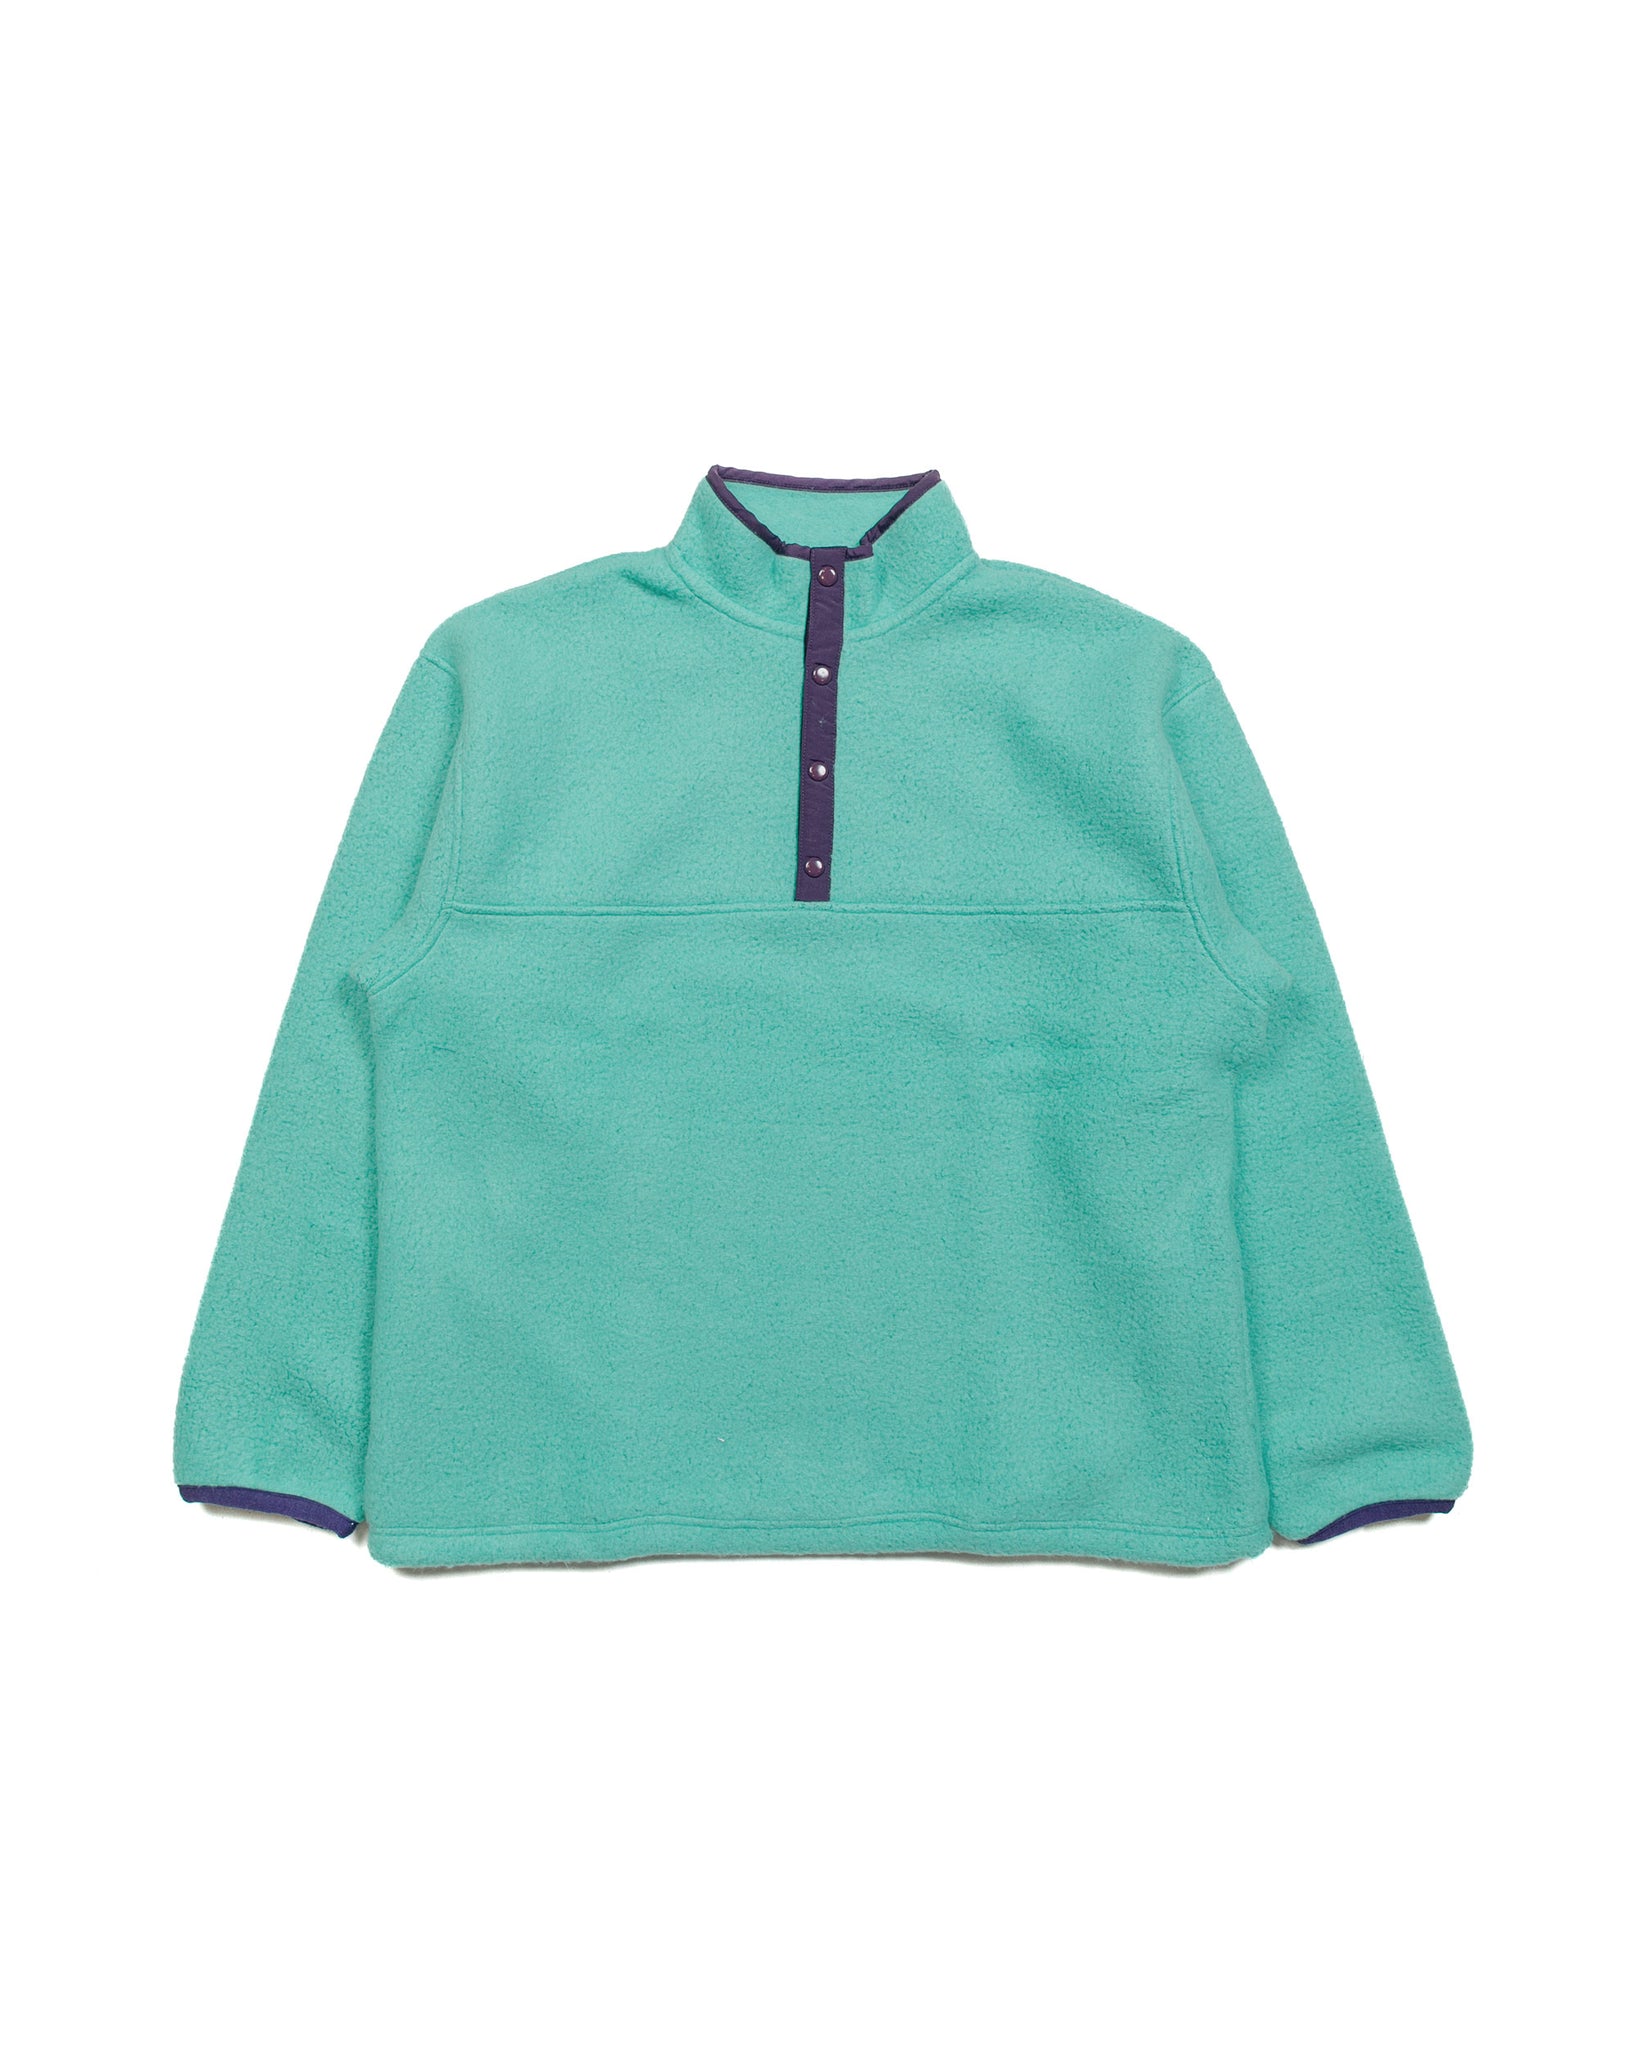 The Real McCoy's MJ23114 Snap Front Pull-Over Fleece Teal